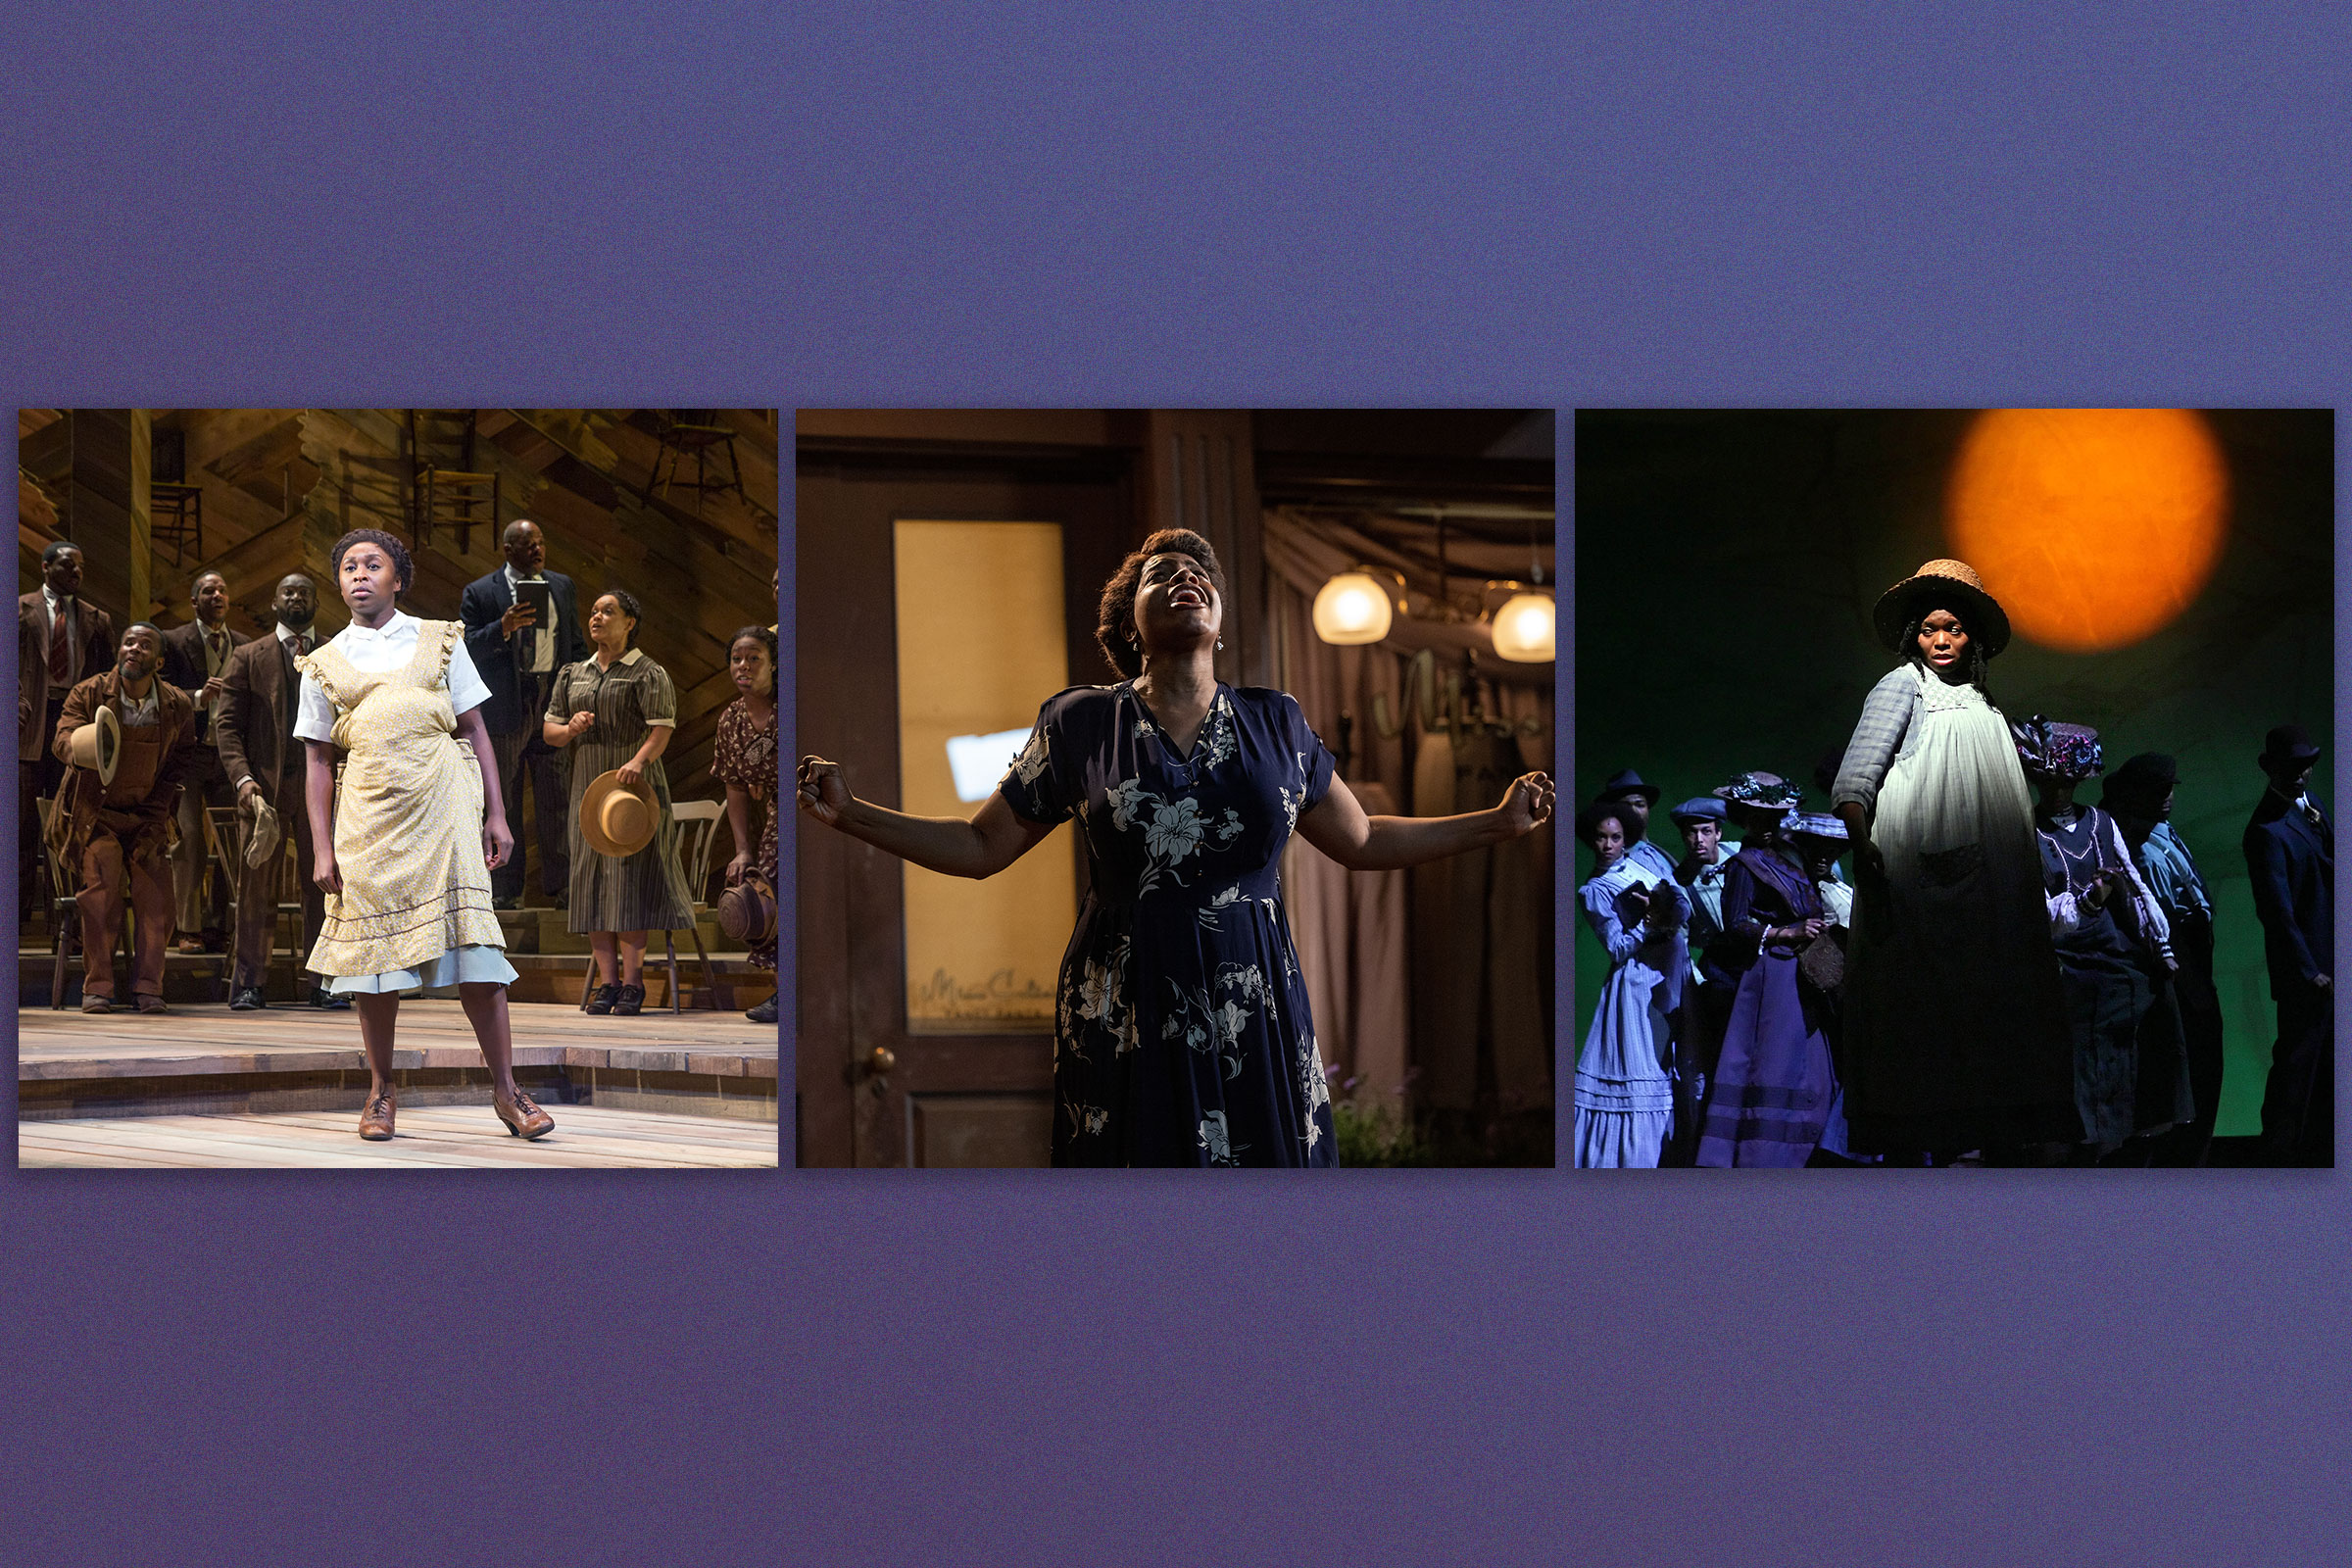 A side by side image on a purple background showing Cynthia Erivo as Celie in The Color Purple at the Bernard B. Jacobs Theatre in New York, Nov. 7, 2015; Fantasia Barrino as Celie in Warner Bros. Entertainment's The Color Purple; LaChanze, center, in The Color Purple at the Broadway Theater in New York in Oct. 2005.